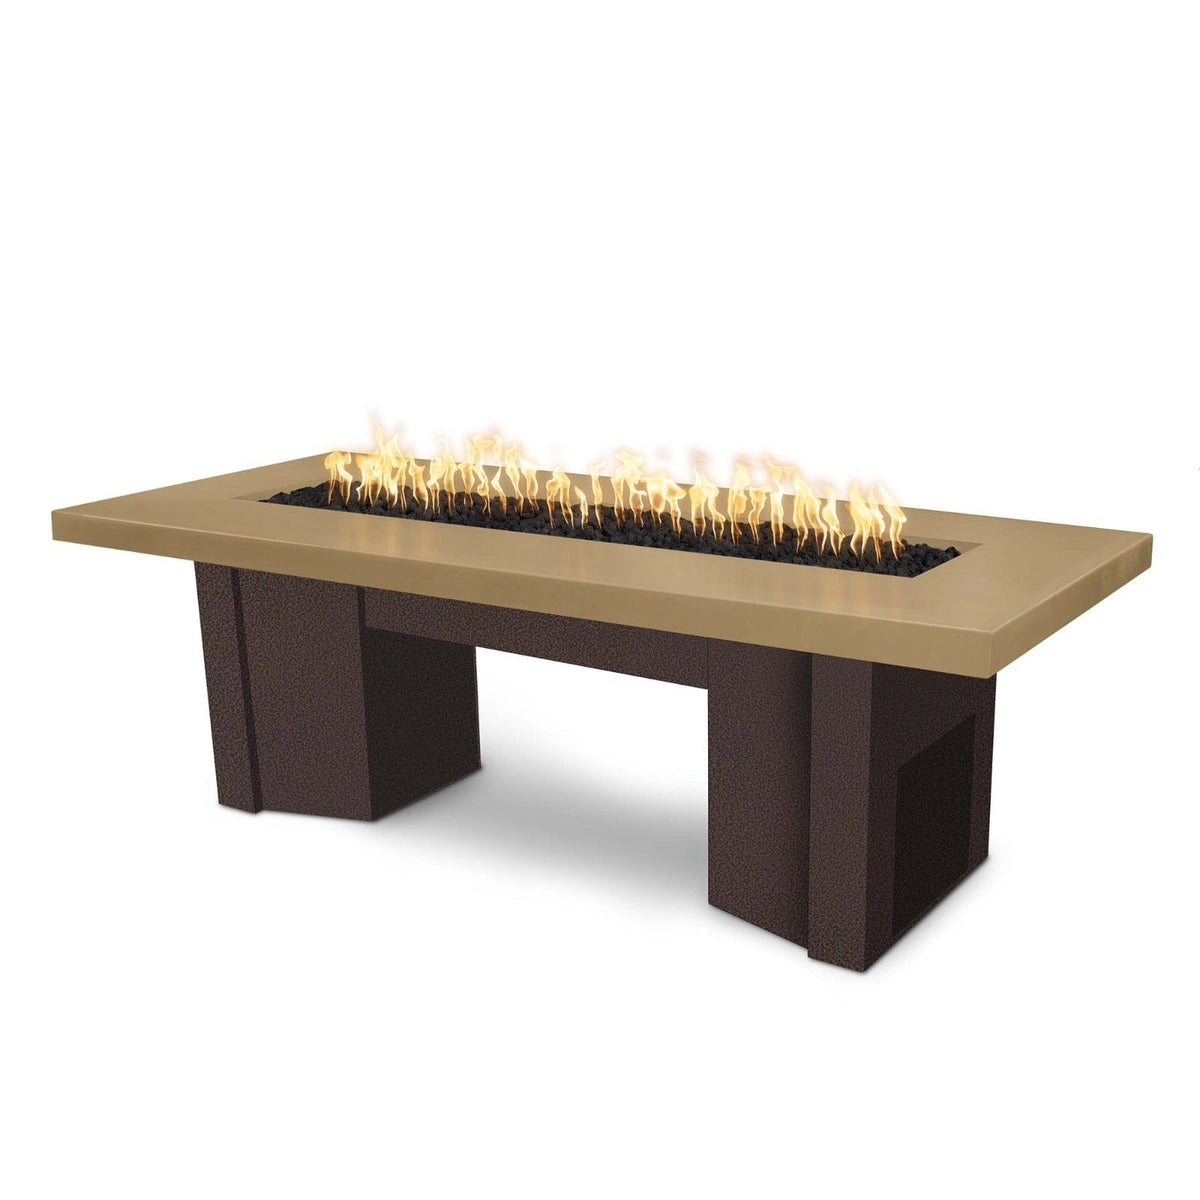 The Outdoor Plus Fire Features Brown (-BRN) / Copper Vein Powder Coated Steel (-CPV) The Outdoor Plus 60&quot; Alameda Fire Table Smooth Concrete in Liquid Propane - Flame Sense System with Push Button Spark Igniter / OPT-ALMGFRC60FSEN-LP